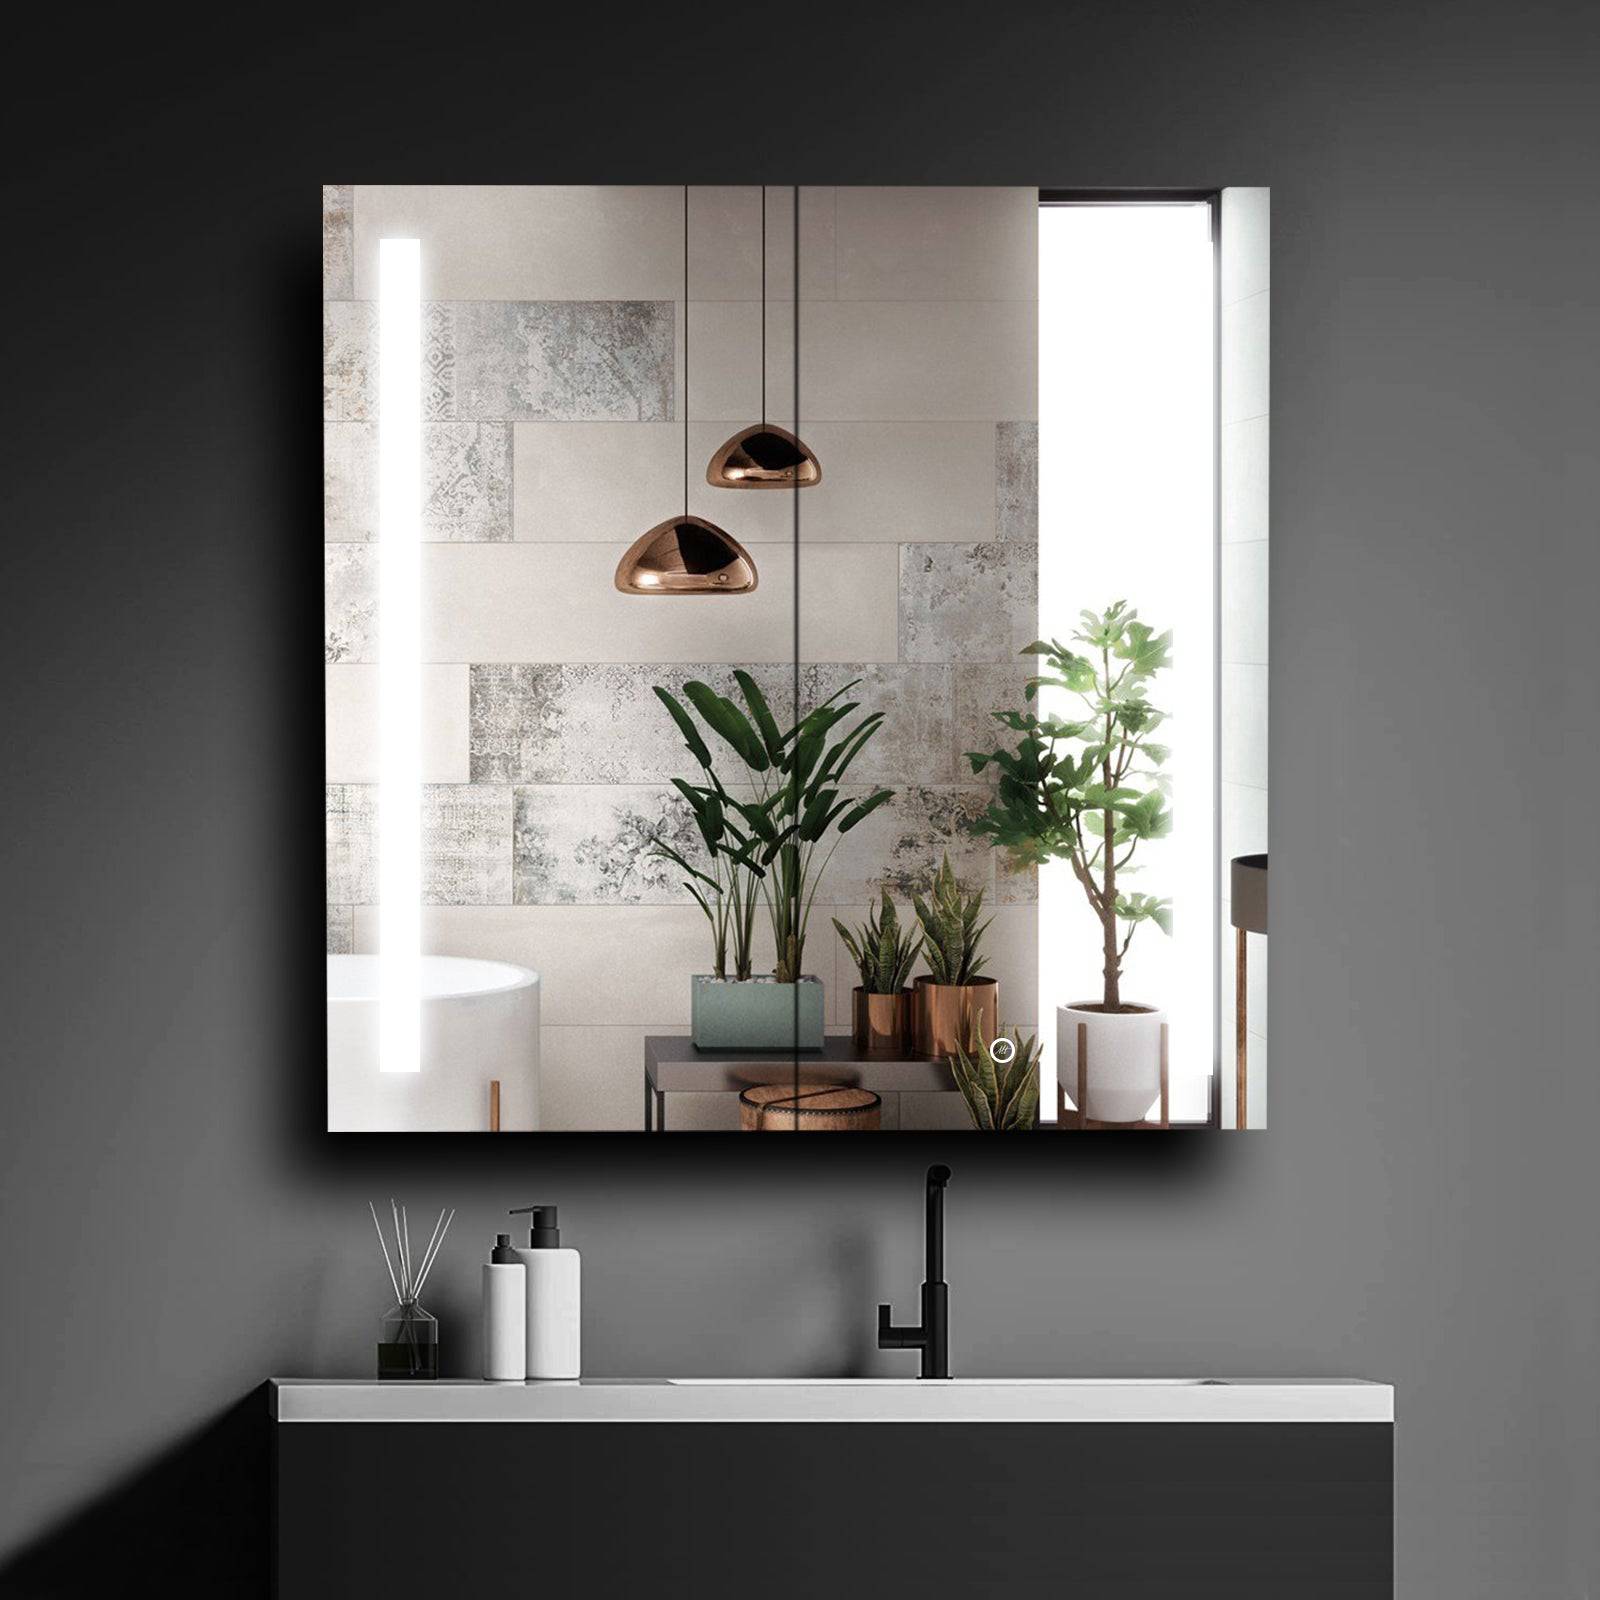 ELL Case Series-Double Door - Modern LED Bathroom Mirror with Defogger, USB Charger, Touch Switch, and Tempered Glass Shelves - Horizontal Mounting - Adjustable Color Temperature - ETL Listed, IP44 Rated - Eco LED Lightings 